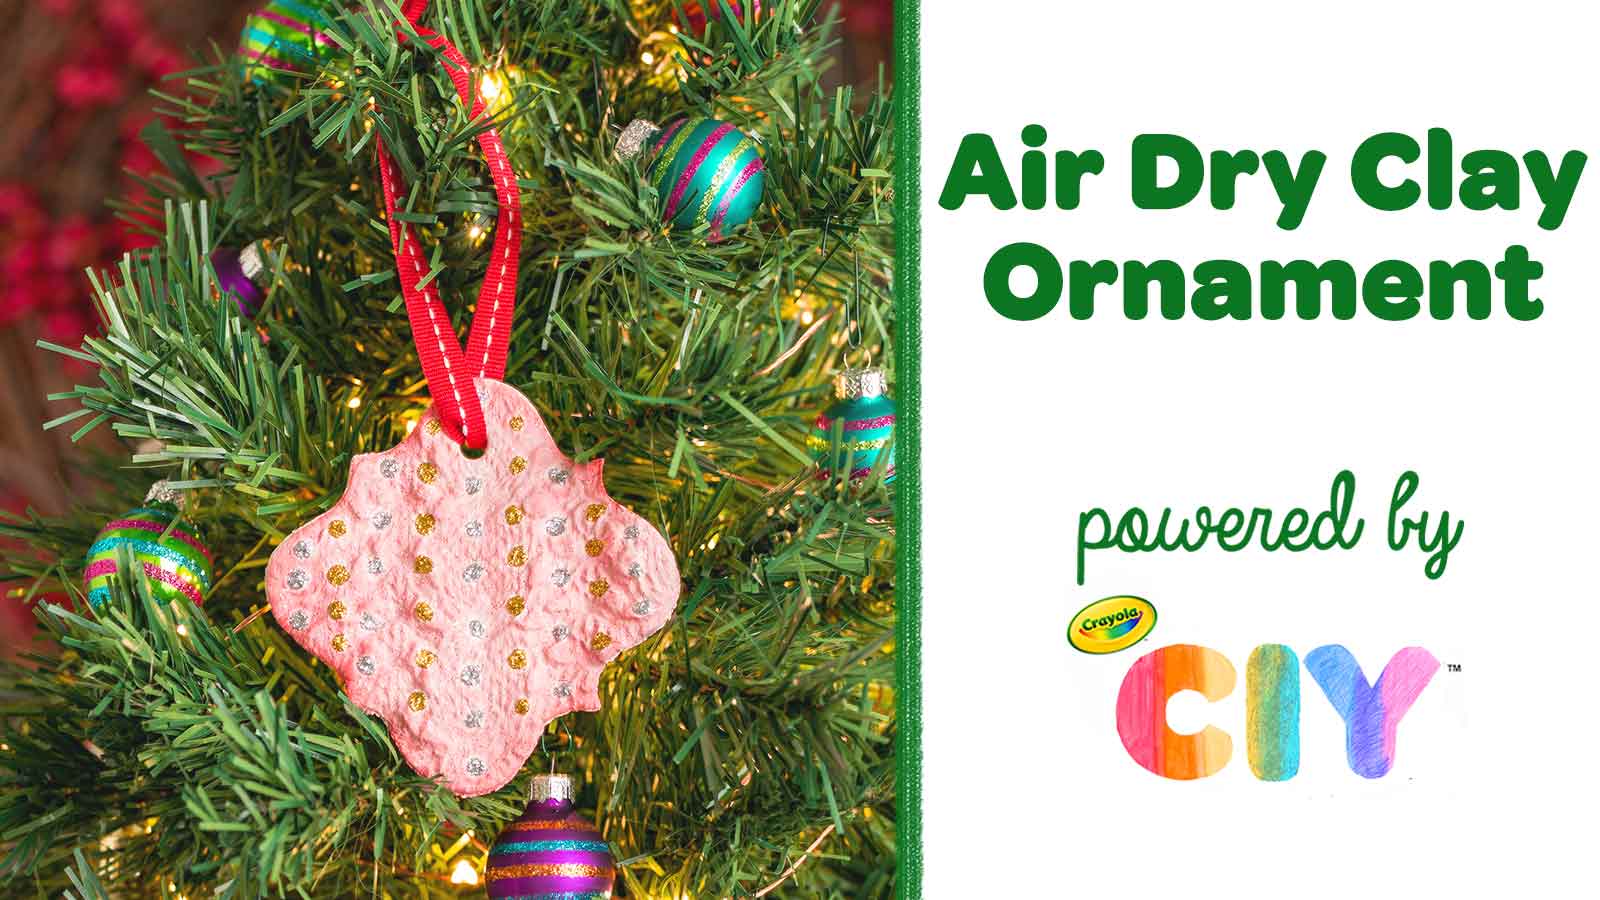 Christmas Craft Kits - Holiday Crafts for Kids and Adults - Decorate and  Paint Your Own Xmas Ornaments - DIY Homemade Ornament Decorating Art Kit -  Christmas Crafts Ready to Make by